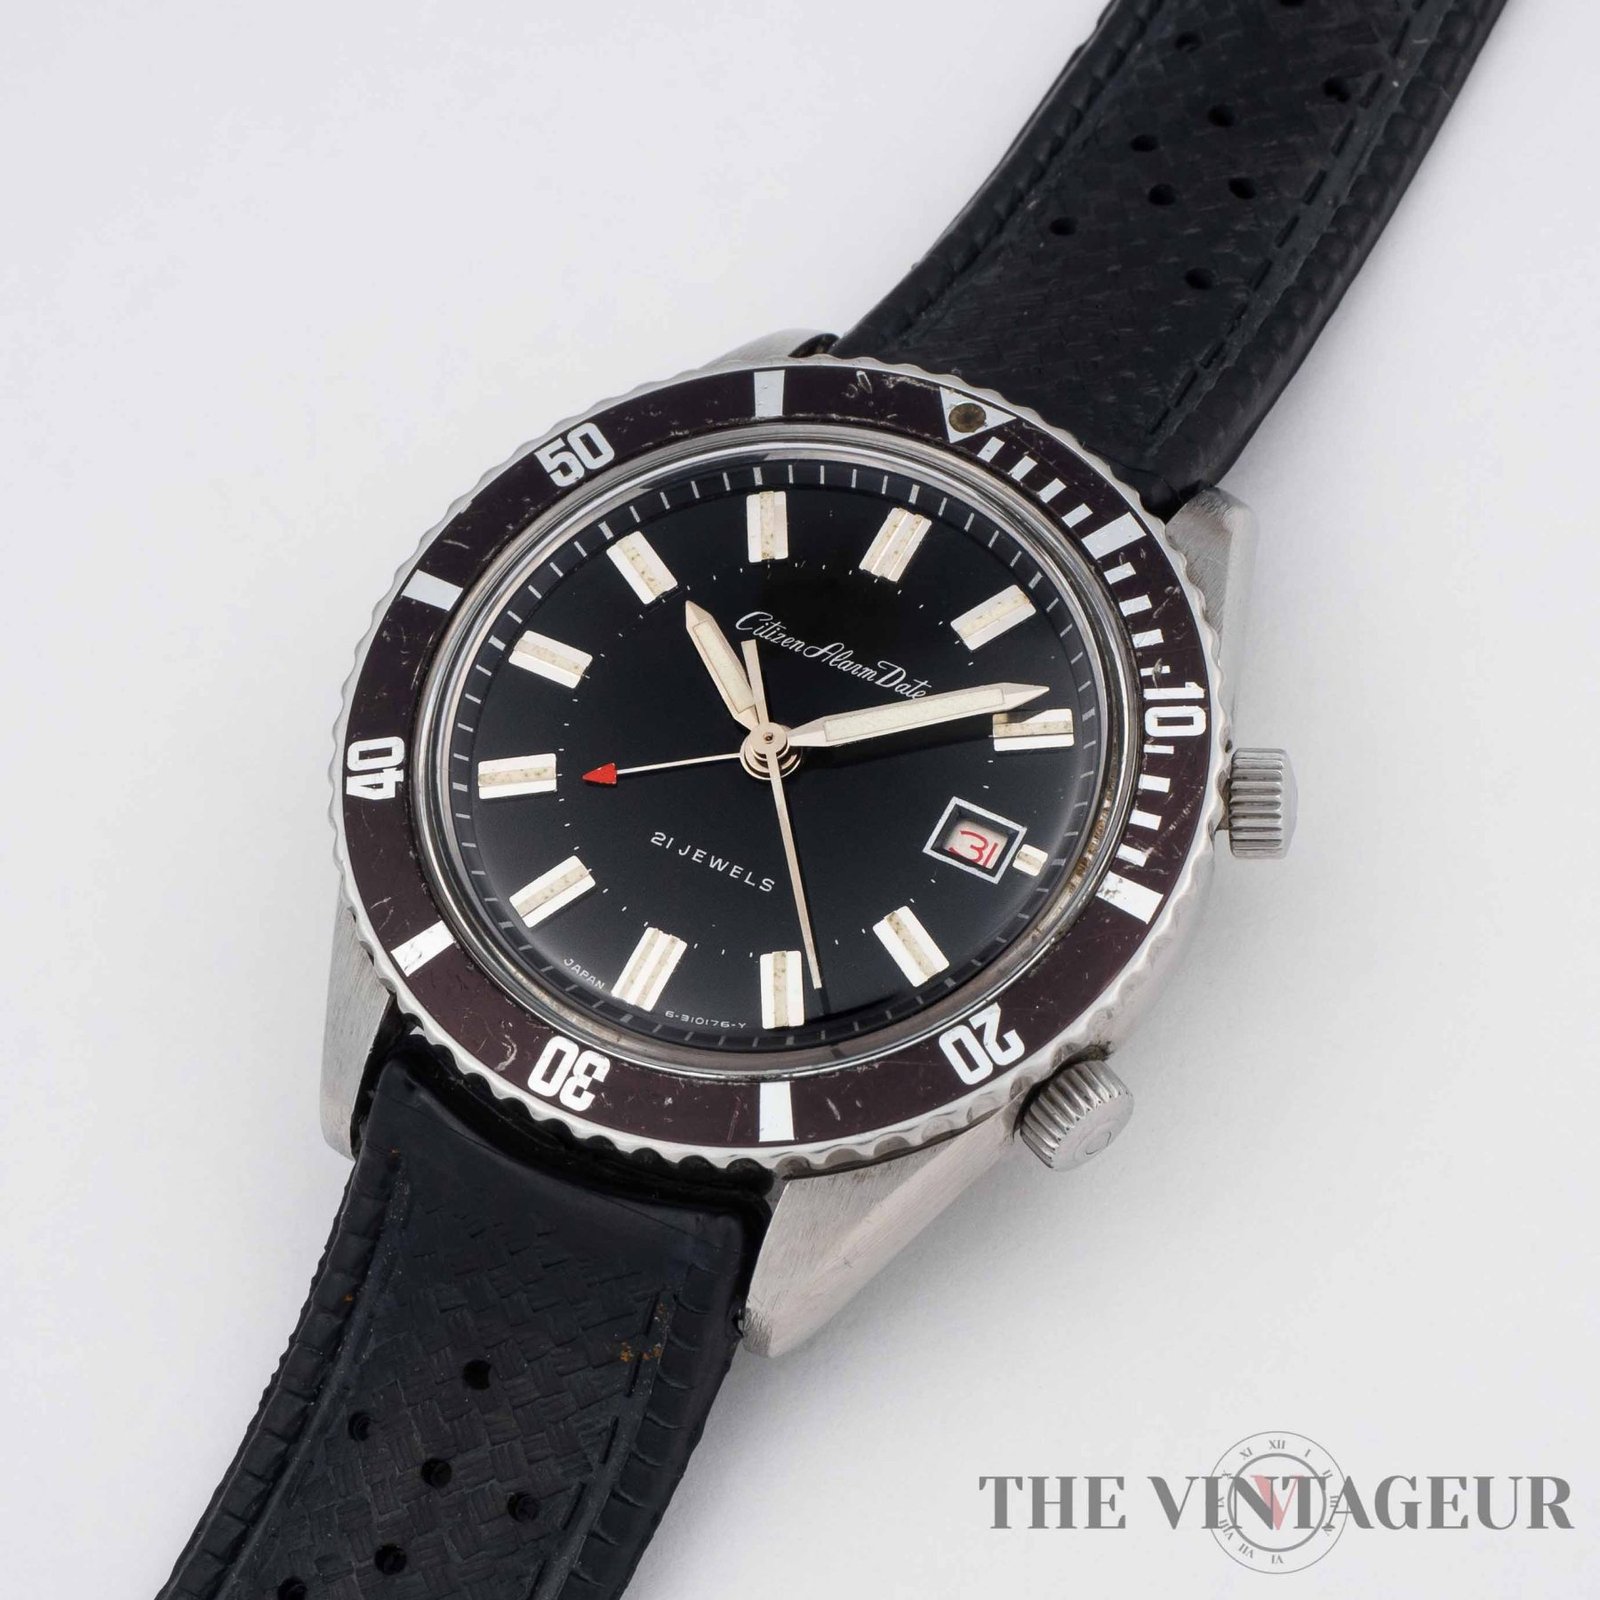 Citizen - Alarm Date - The Vintageur - Your bespoke watches collection - Collectible watches and more - 7